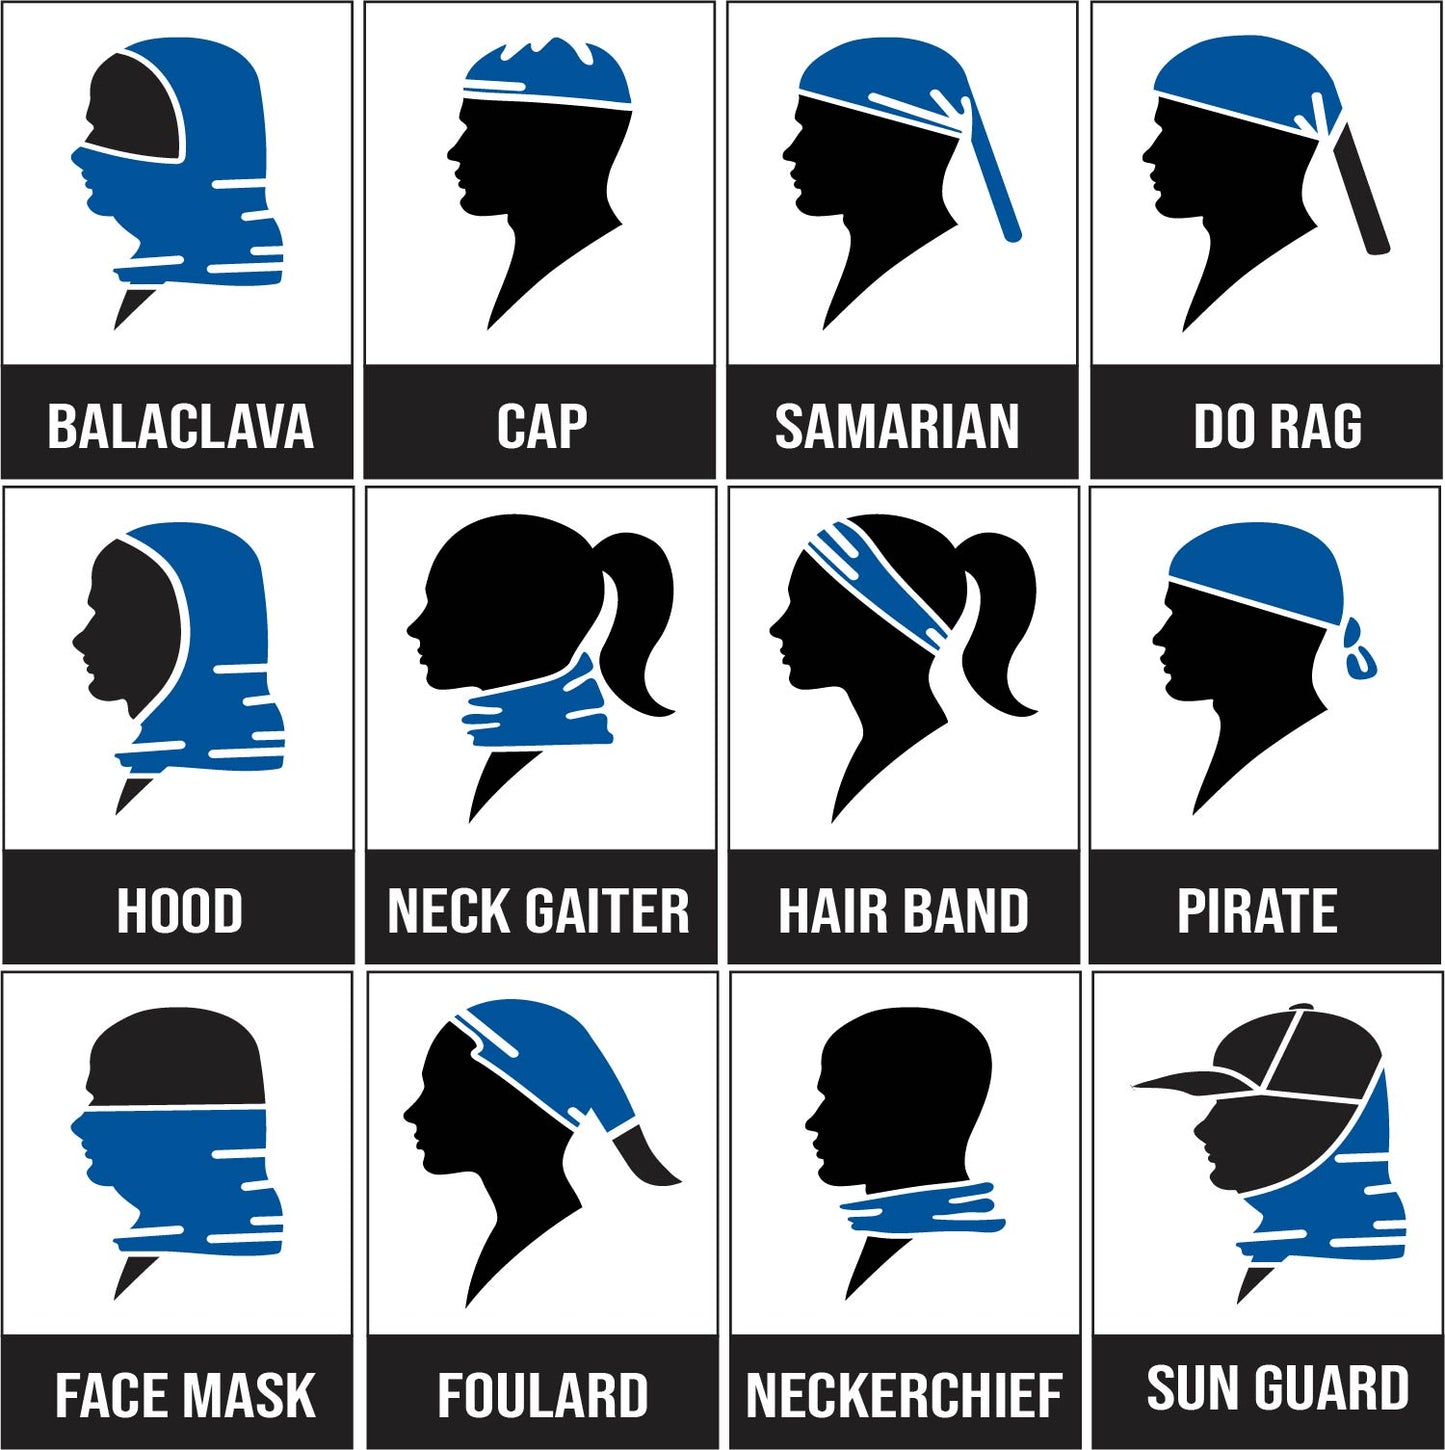 The new Universal Face Shield meets CDC recommendations for face coverings. Both lightweight and breathable, this all season sun protection shield is multi functional with more than 12 ways to wear. Stretchable fabric makes this face shield one size fits all.